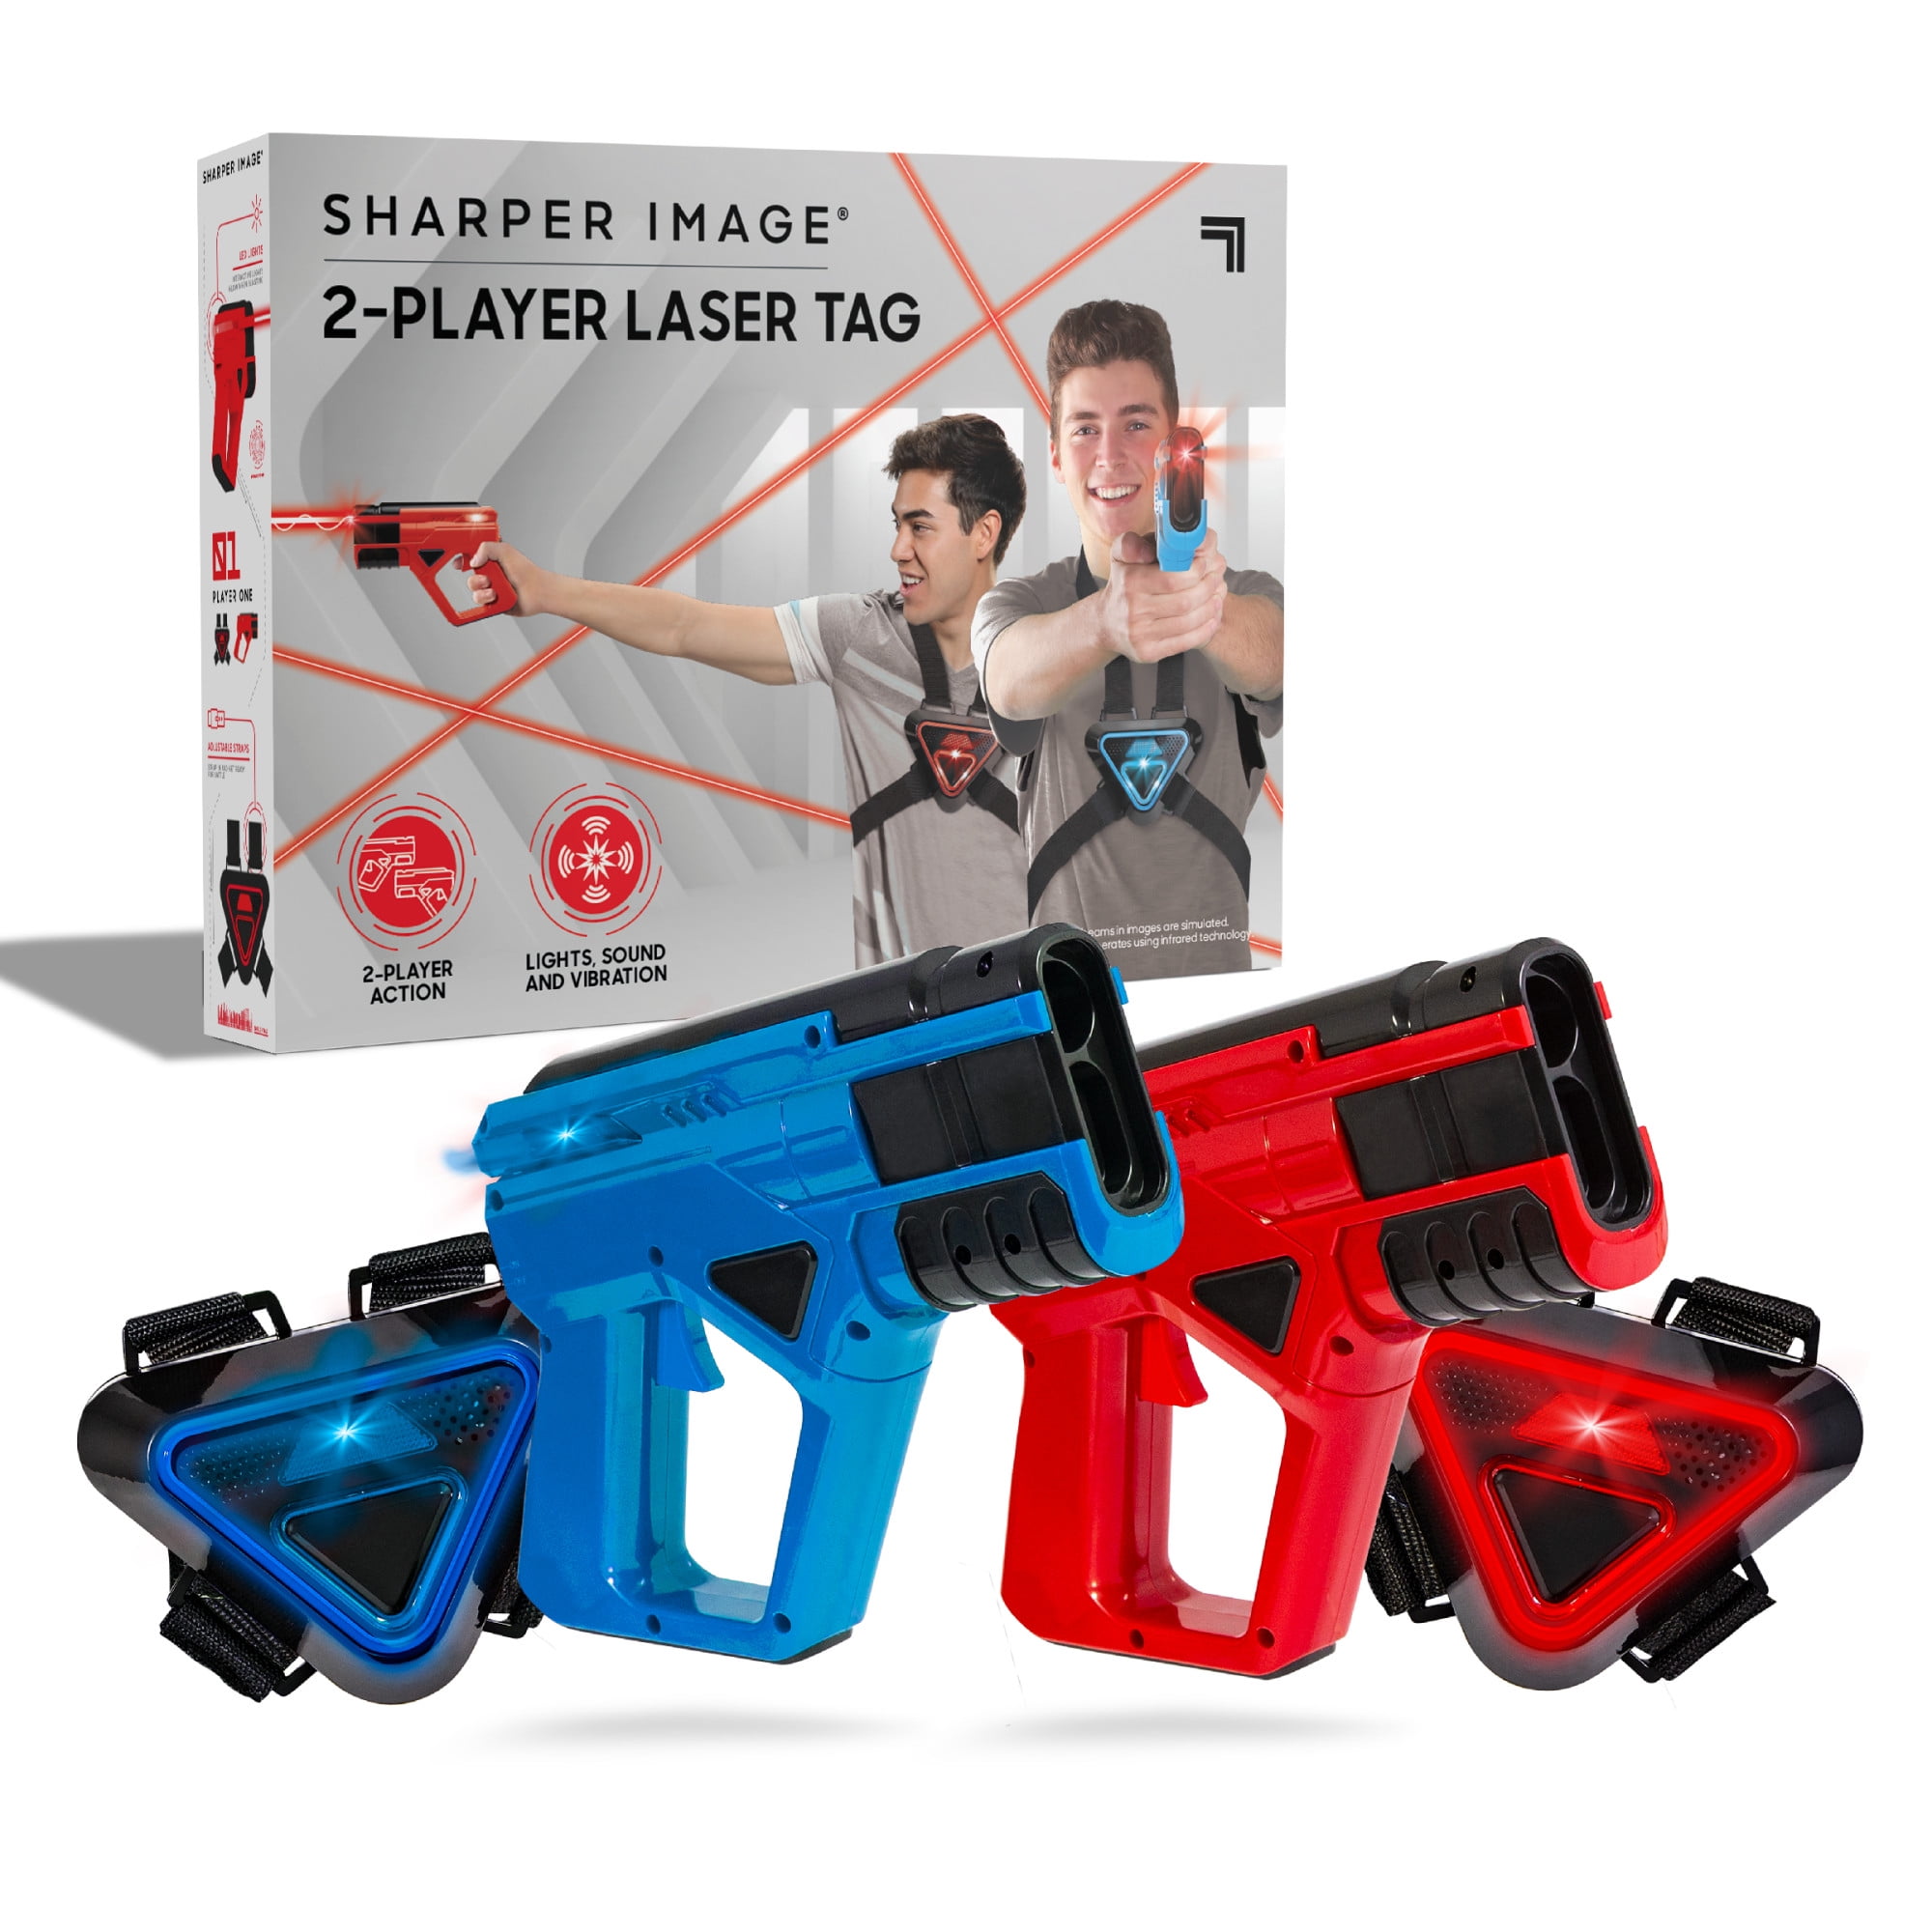 Sharper Image® Team Battle Laser Tag with Safe for Children and Adults, Indoor and Outdoor Battle Games, Combine Multiple Sets for Multiplayer Free-for-All, 8-pieces, Blue And Red, Age 8+